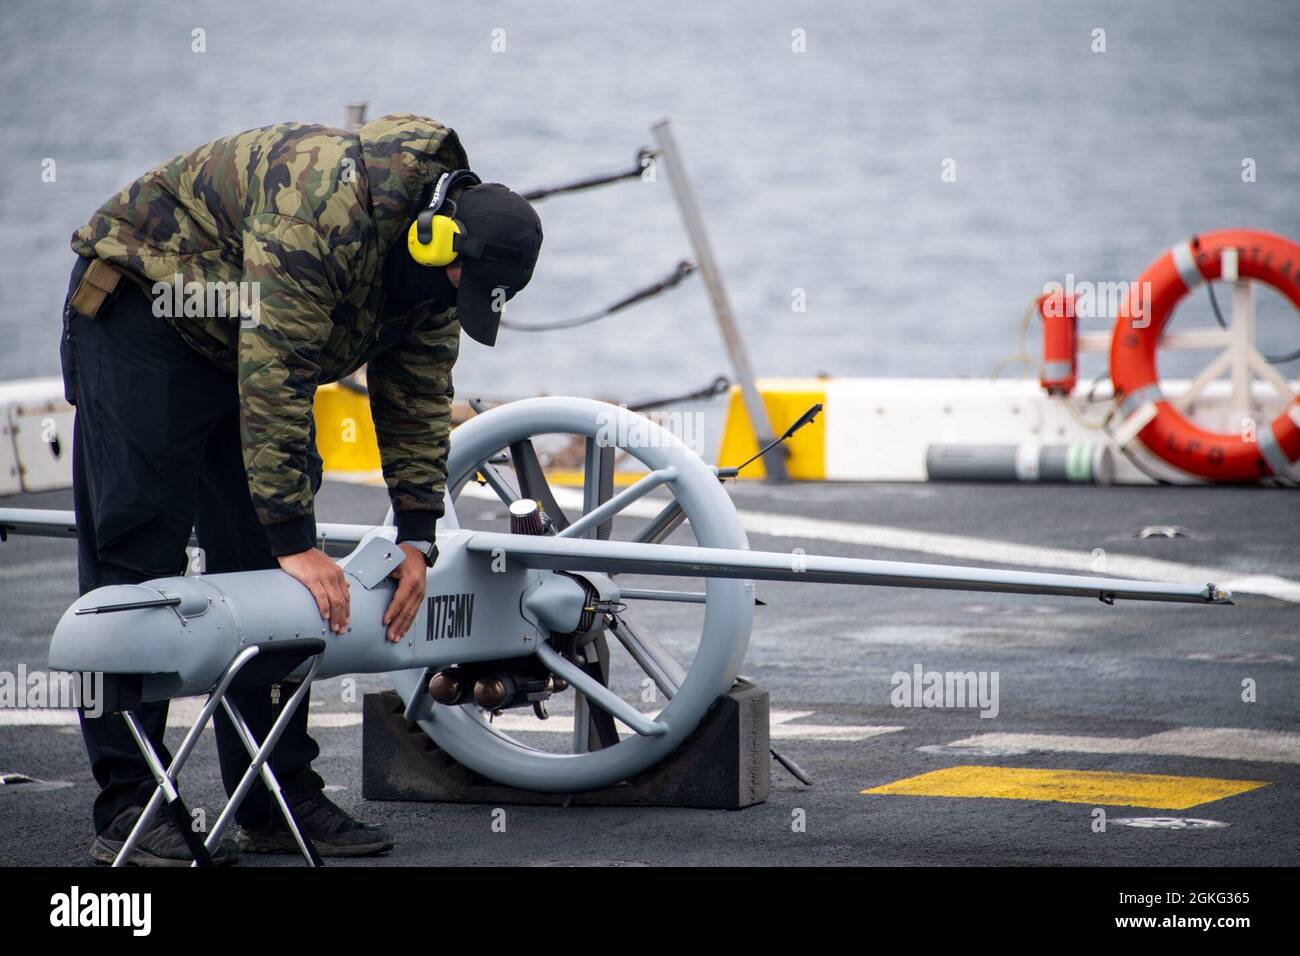 PACIFIC OCEAN (April 13, 2021) — Joshua Fasnacht, a representative from Martin UAV, checks the internals of a V-Bat vertical take-off and landing unmanned aerial vehicle on the flight deck of amphibious transport dock USS Portland (LPD 27), April 13. Portland is underway conducting routine operations in U.S. Third Fleet. Stock Photo